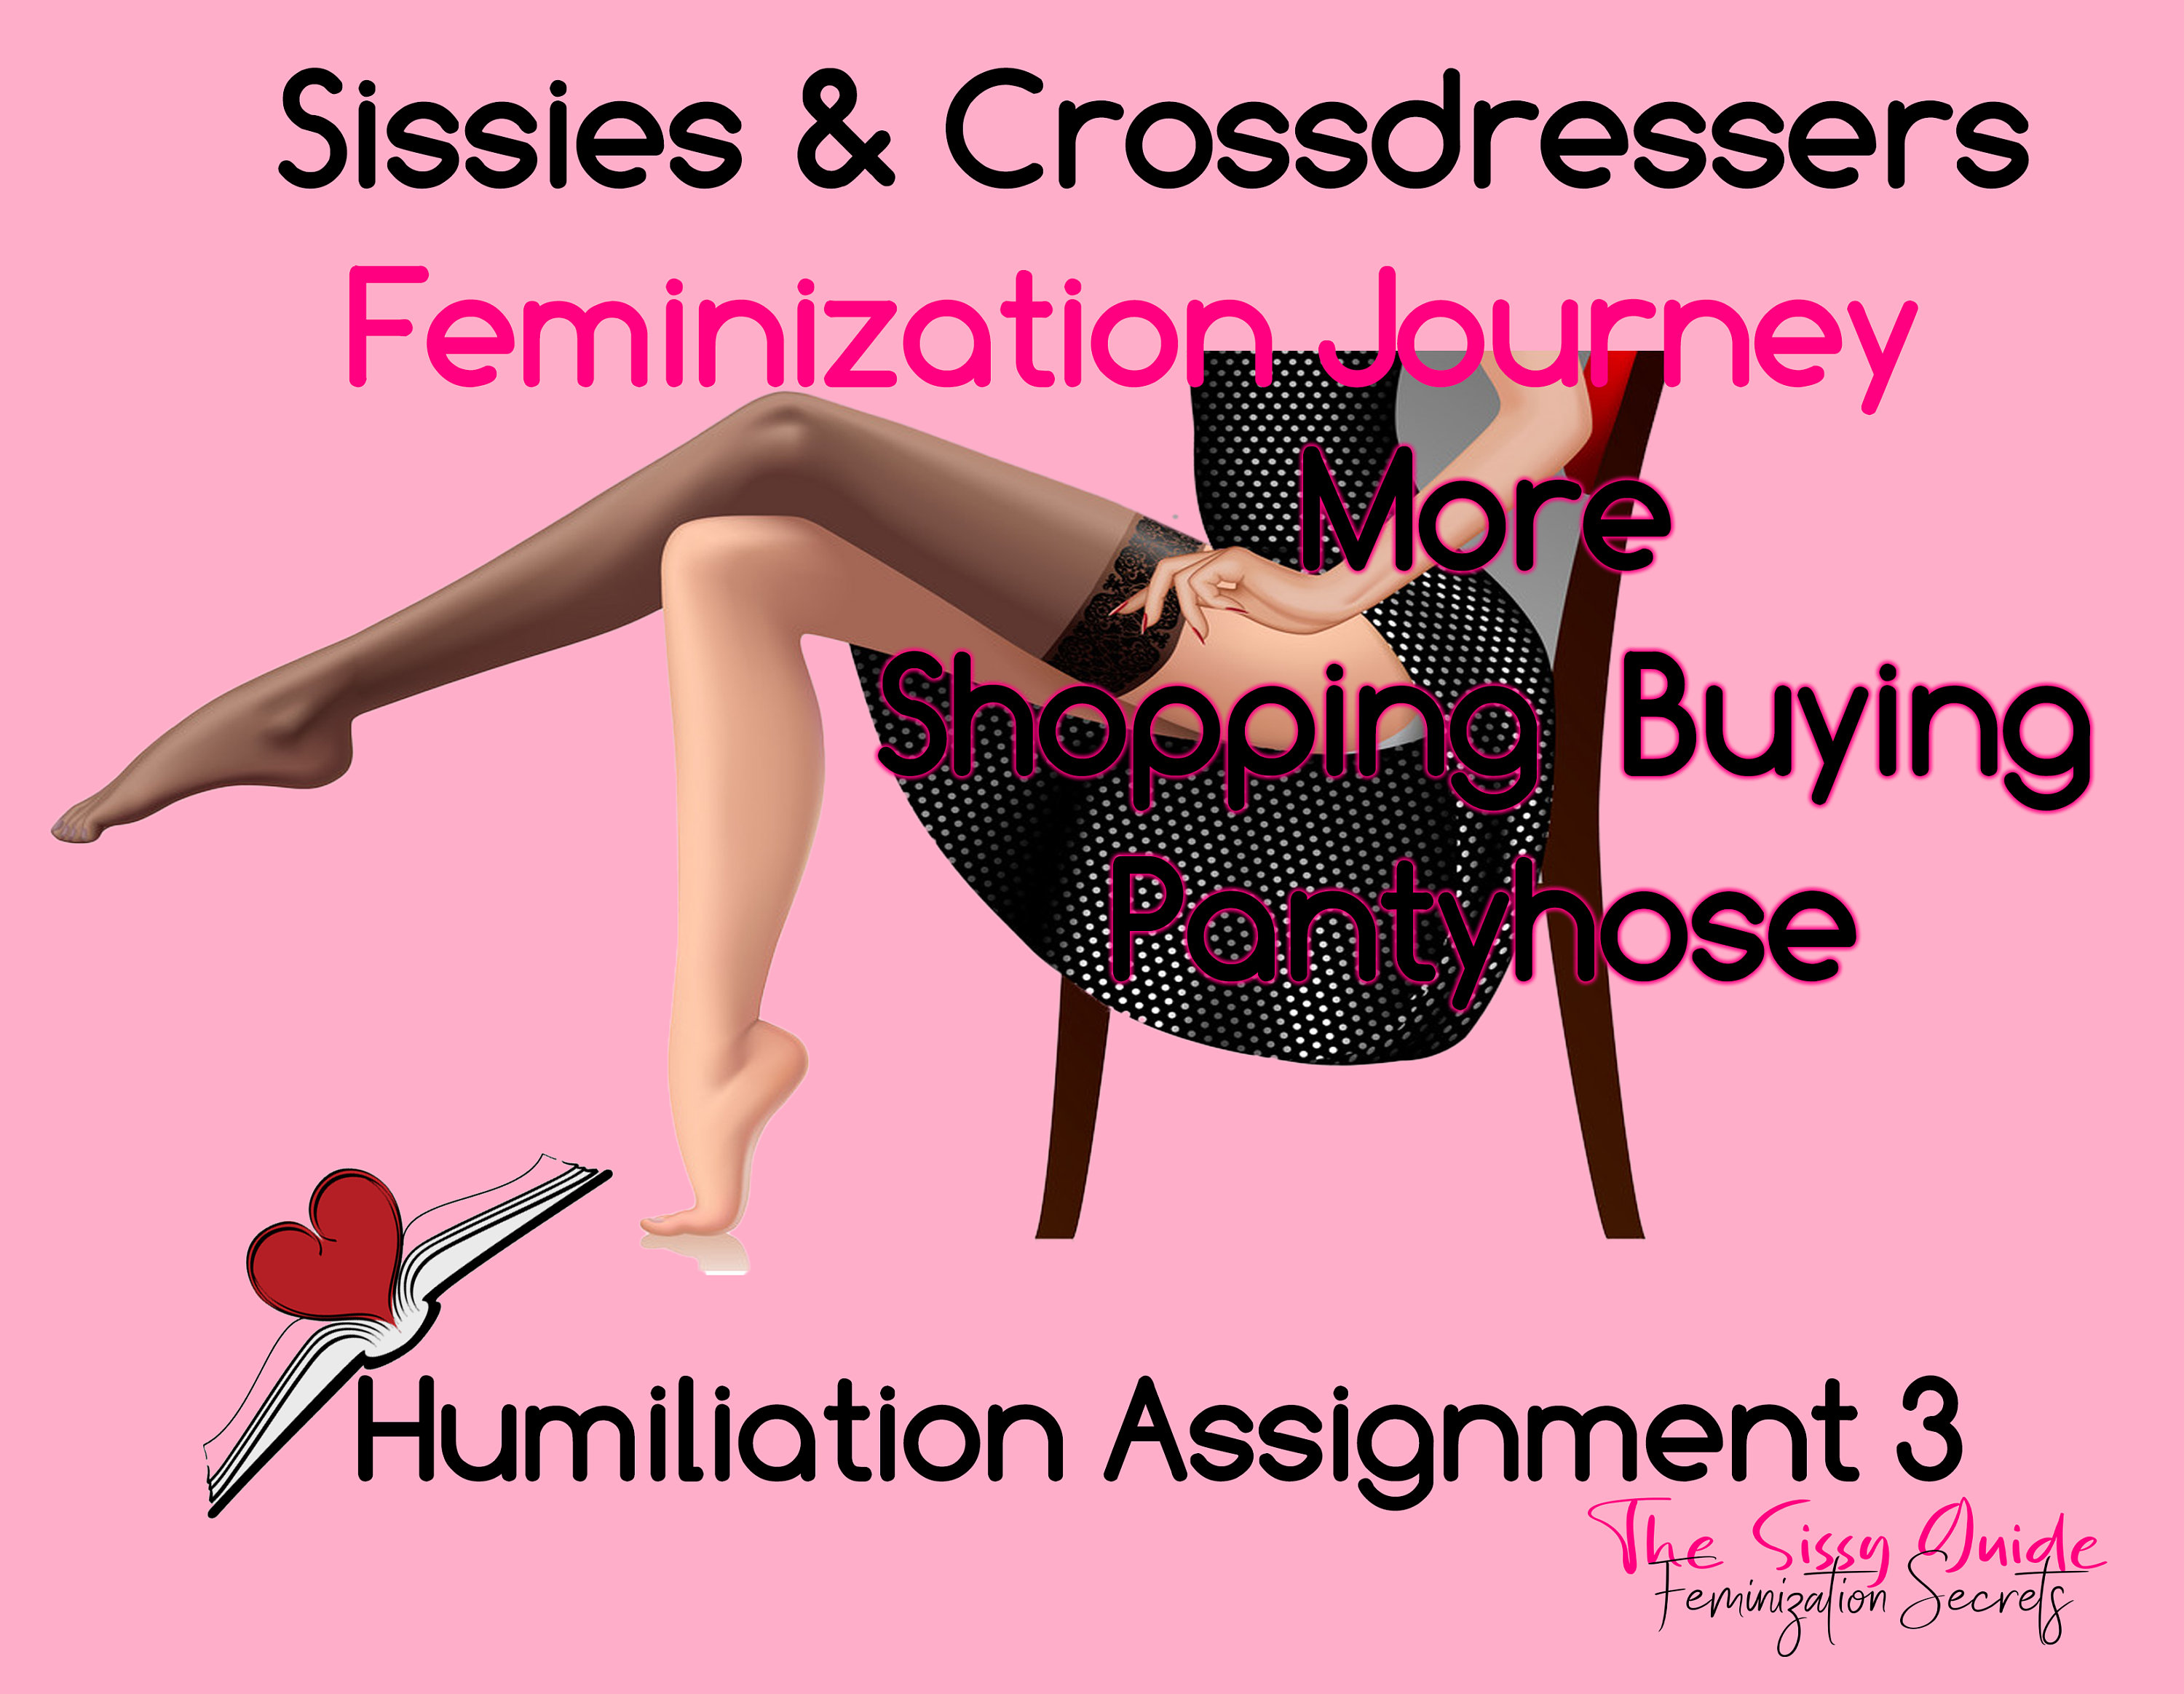 Sissy Public Humiliation Assignment 3 More Shopping Buying